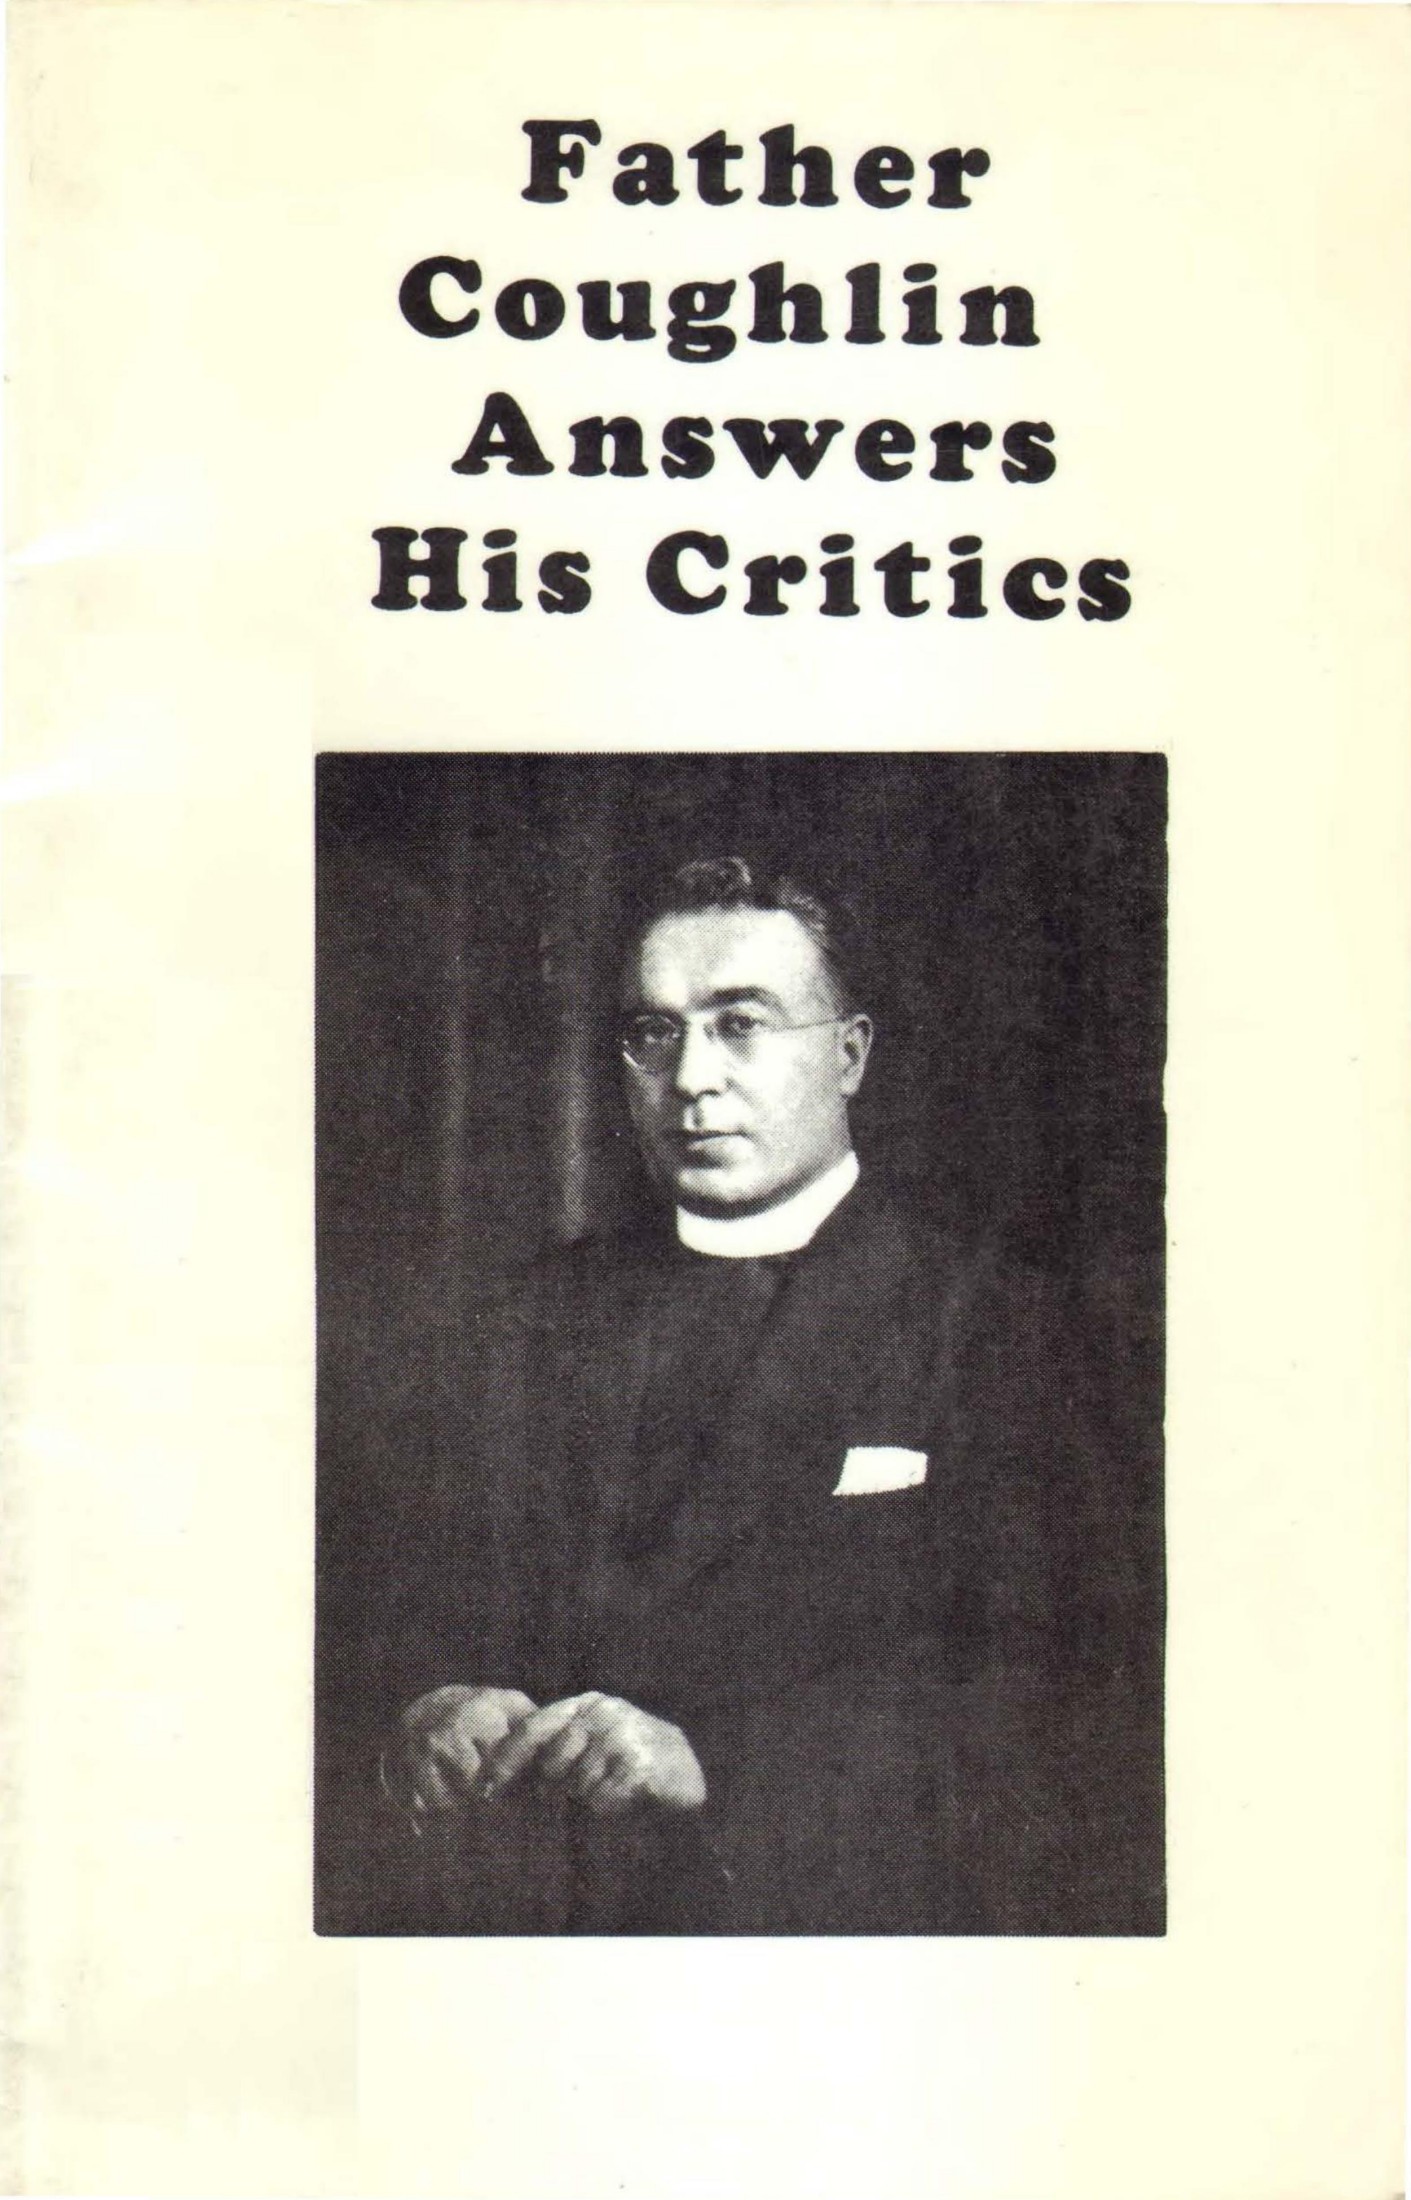 Father Coughlin Answers His Critics (1953) by Charles Edward Coughlin